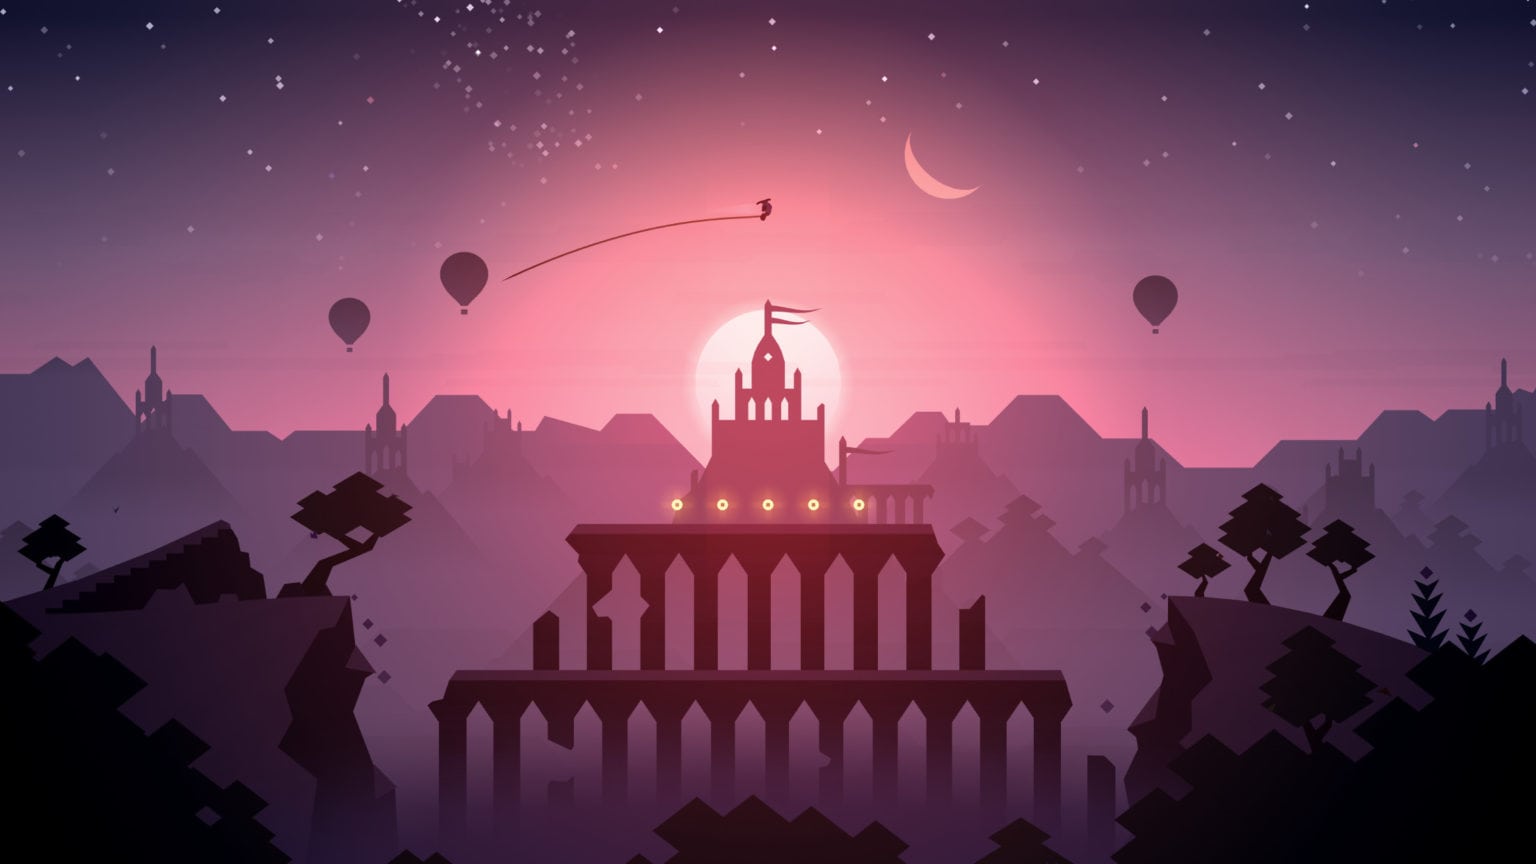 “Alto's Adventure” and “Alto's Odyssey“ are here to help while you’re self isolating.